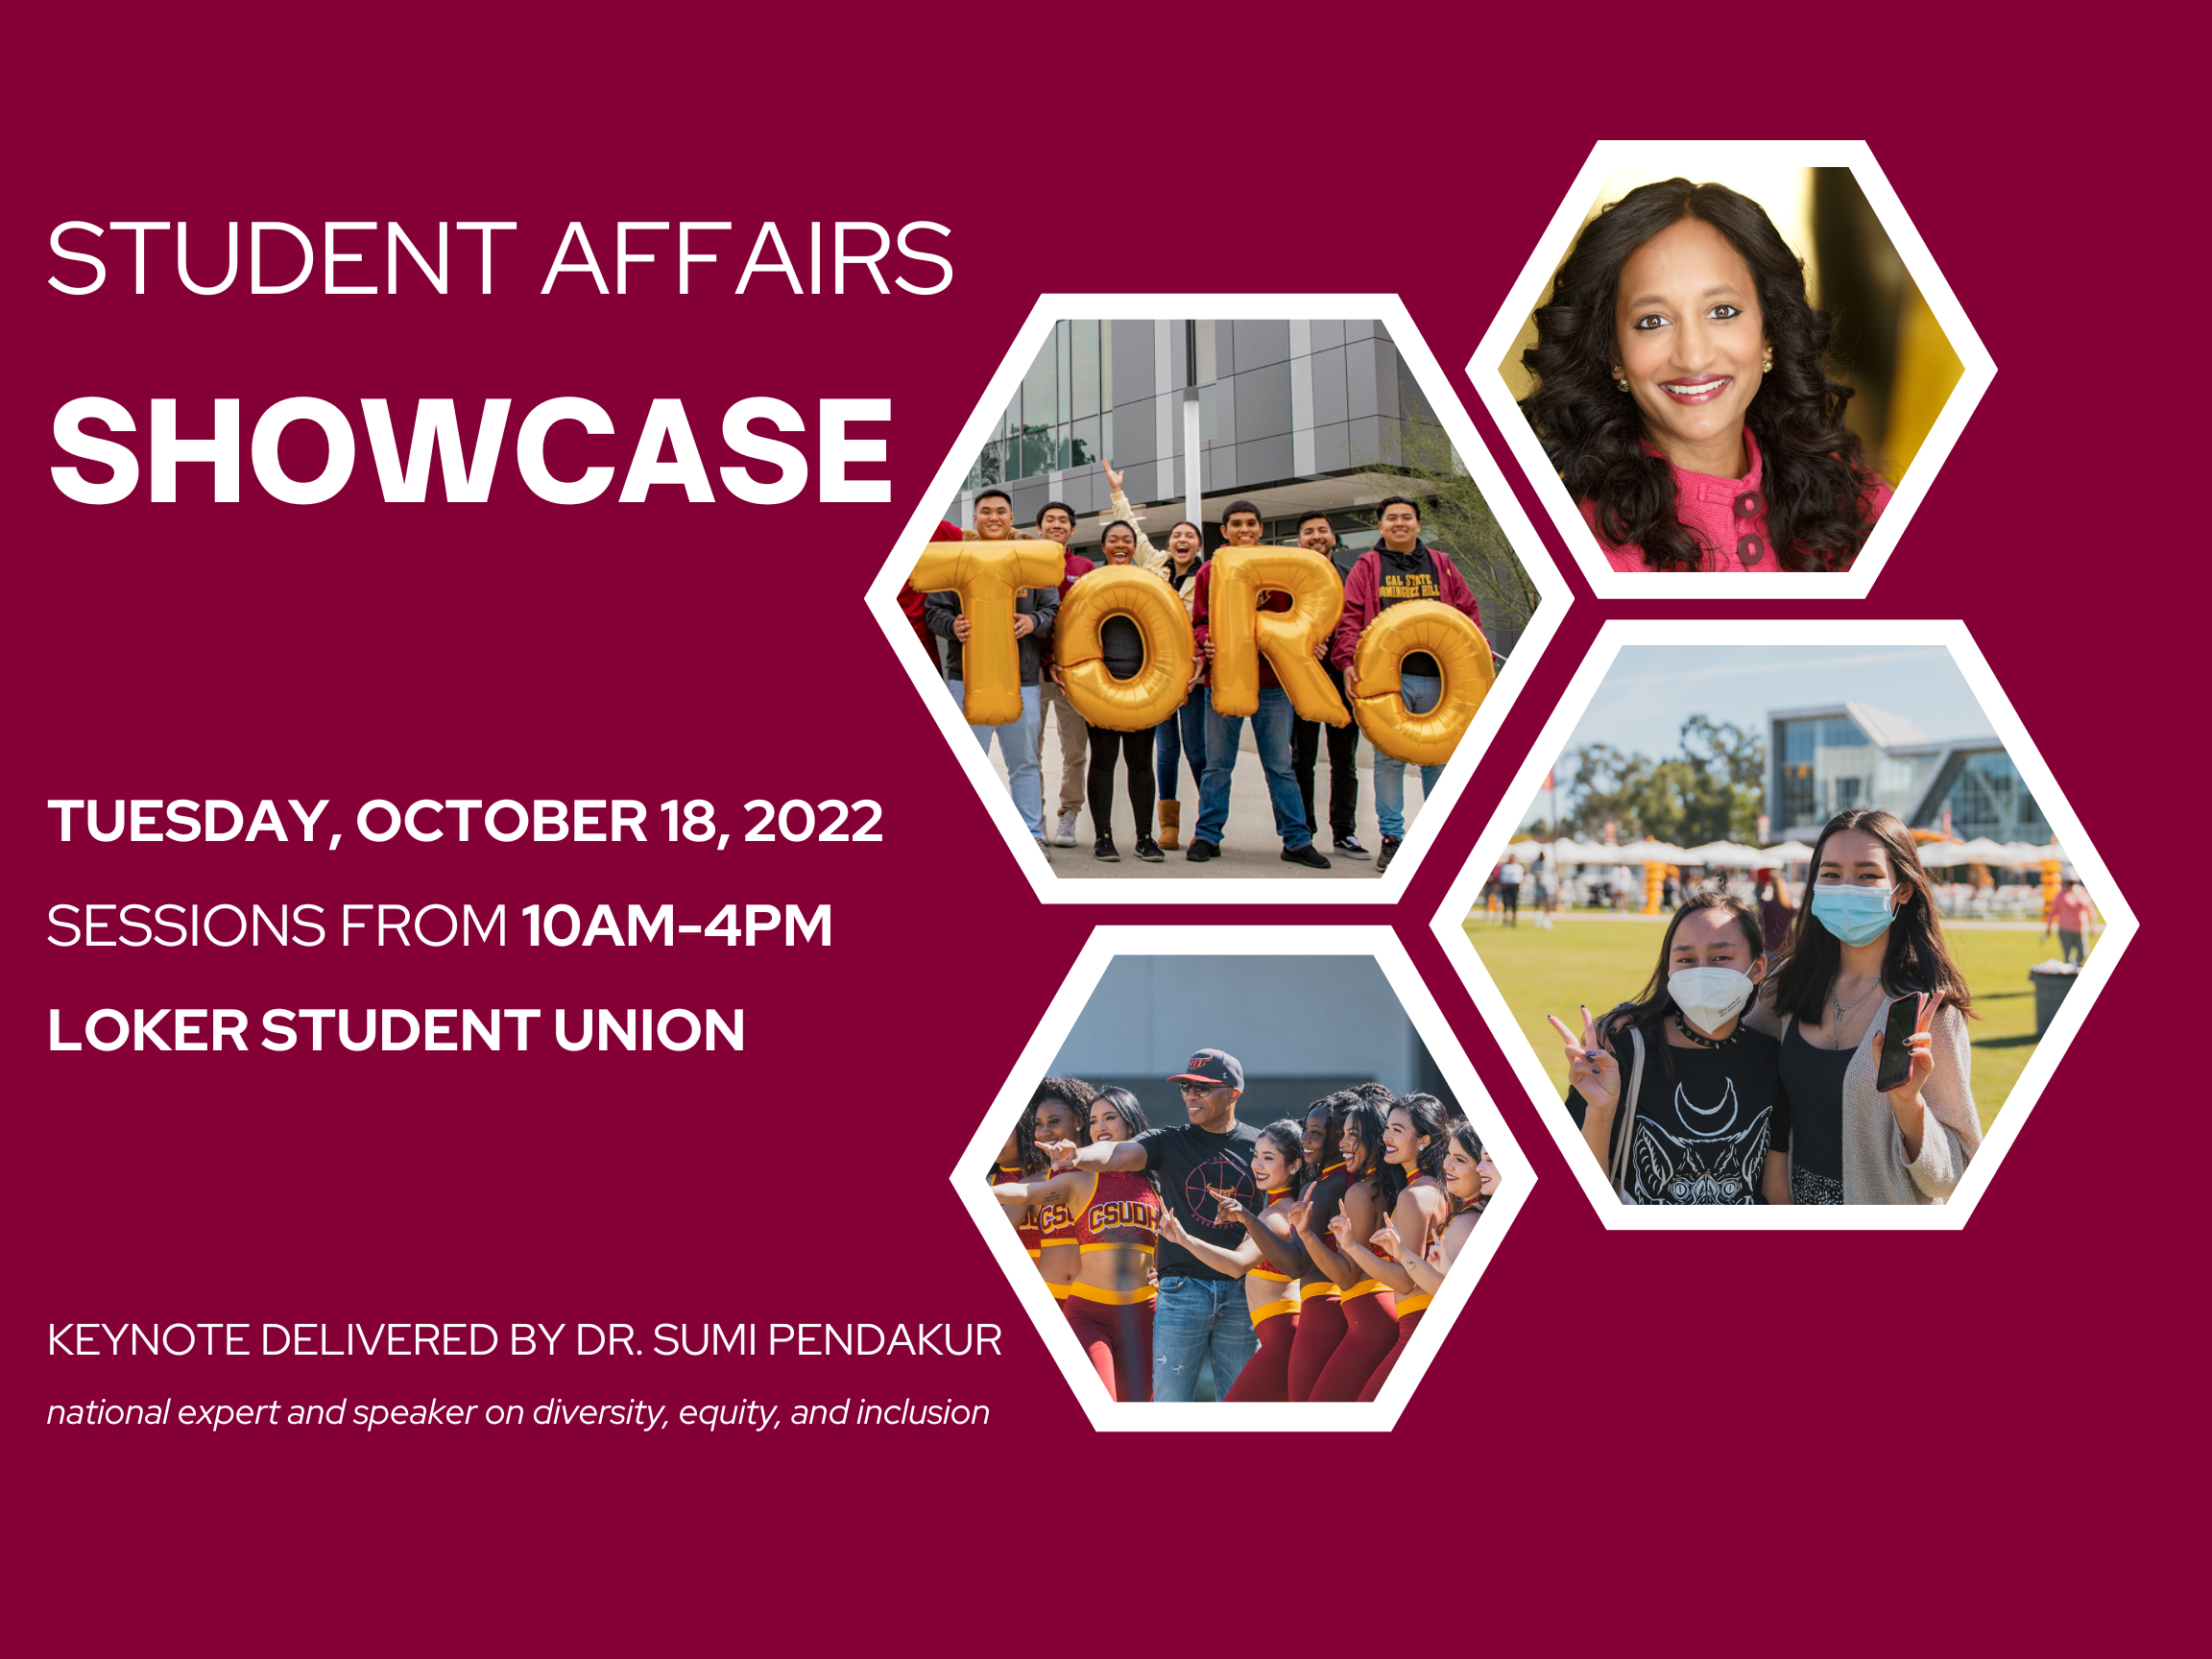 Student Affairs Showcase is Tuesday October 18 2022